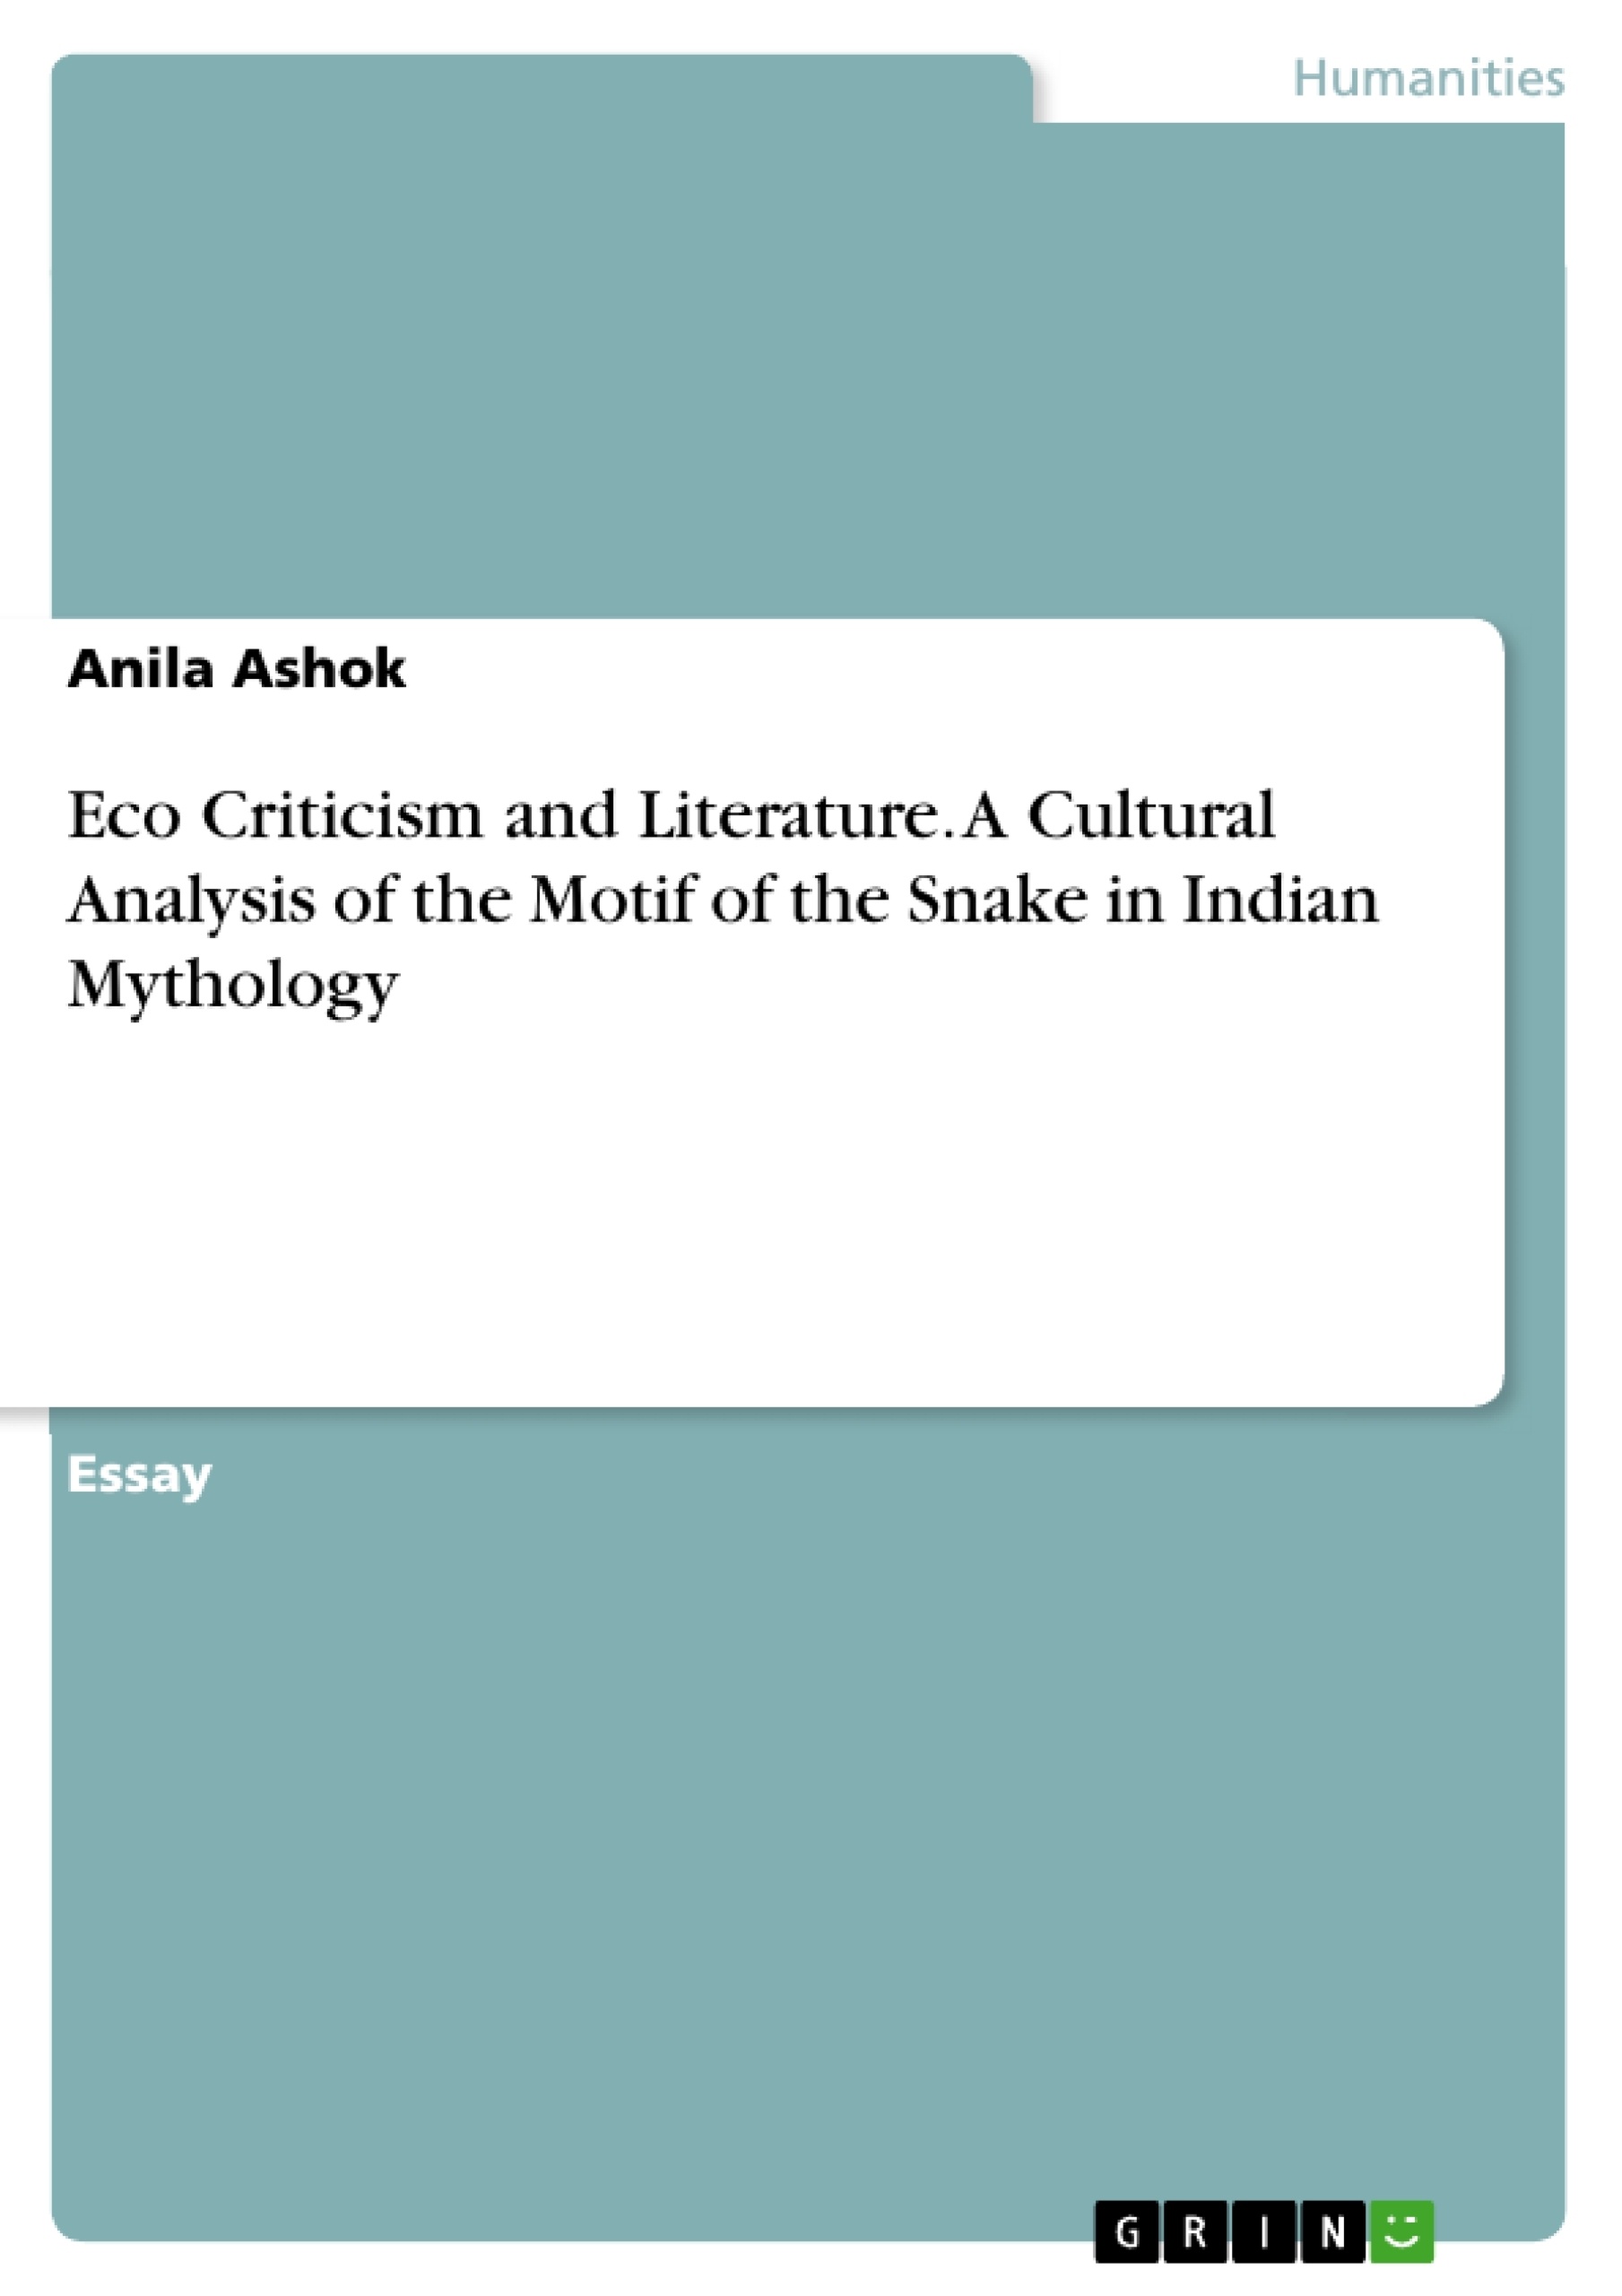 Title: Eco Criticism and Literature. A Cultural Analysis of the Motif of the Snake in Indian Mythology